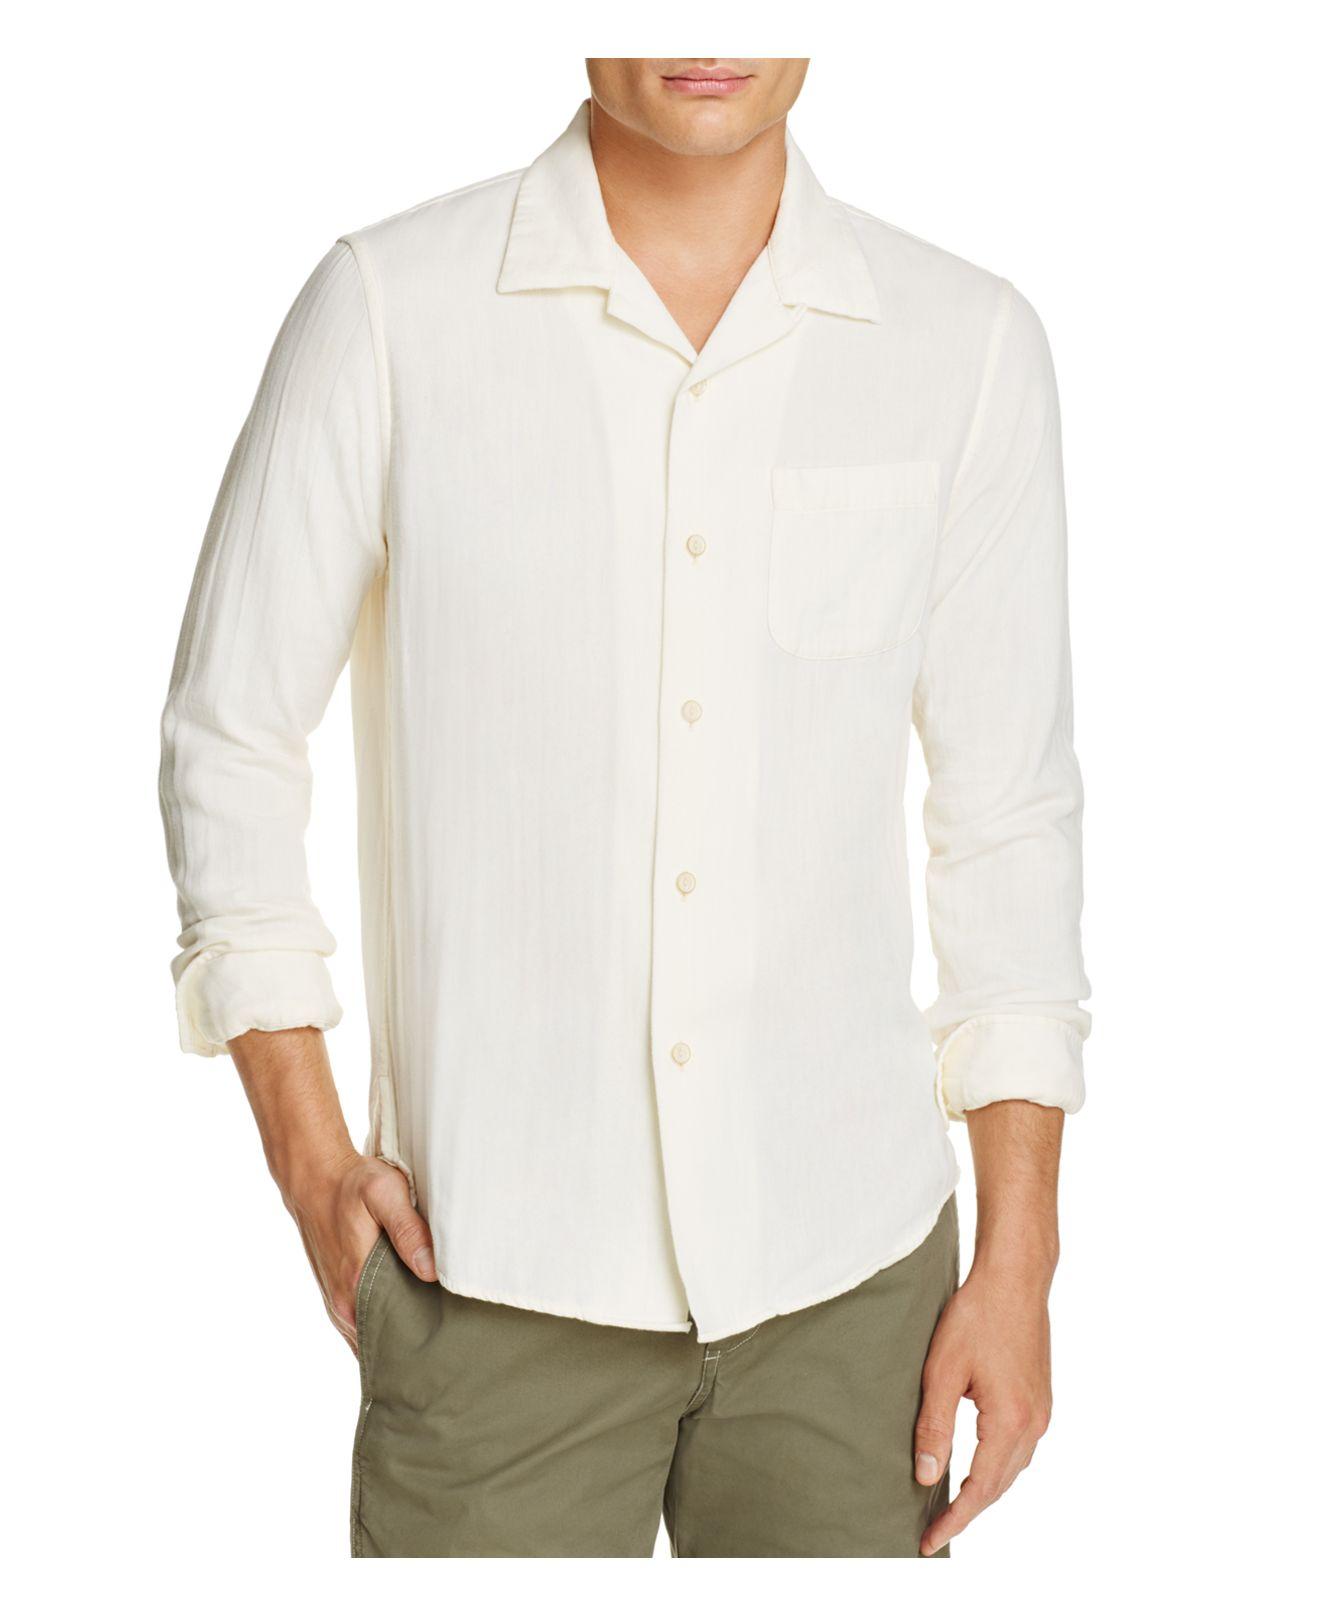 Lyst - Outerknown The Beach Slim Fit Button-down Shirt in White for Men